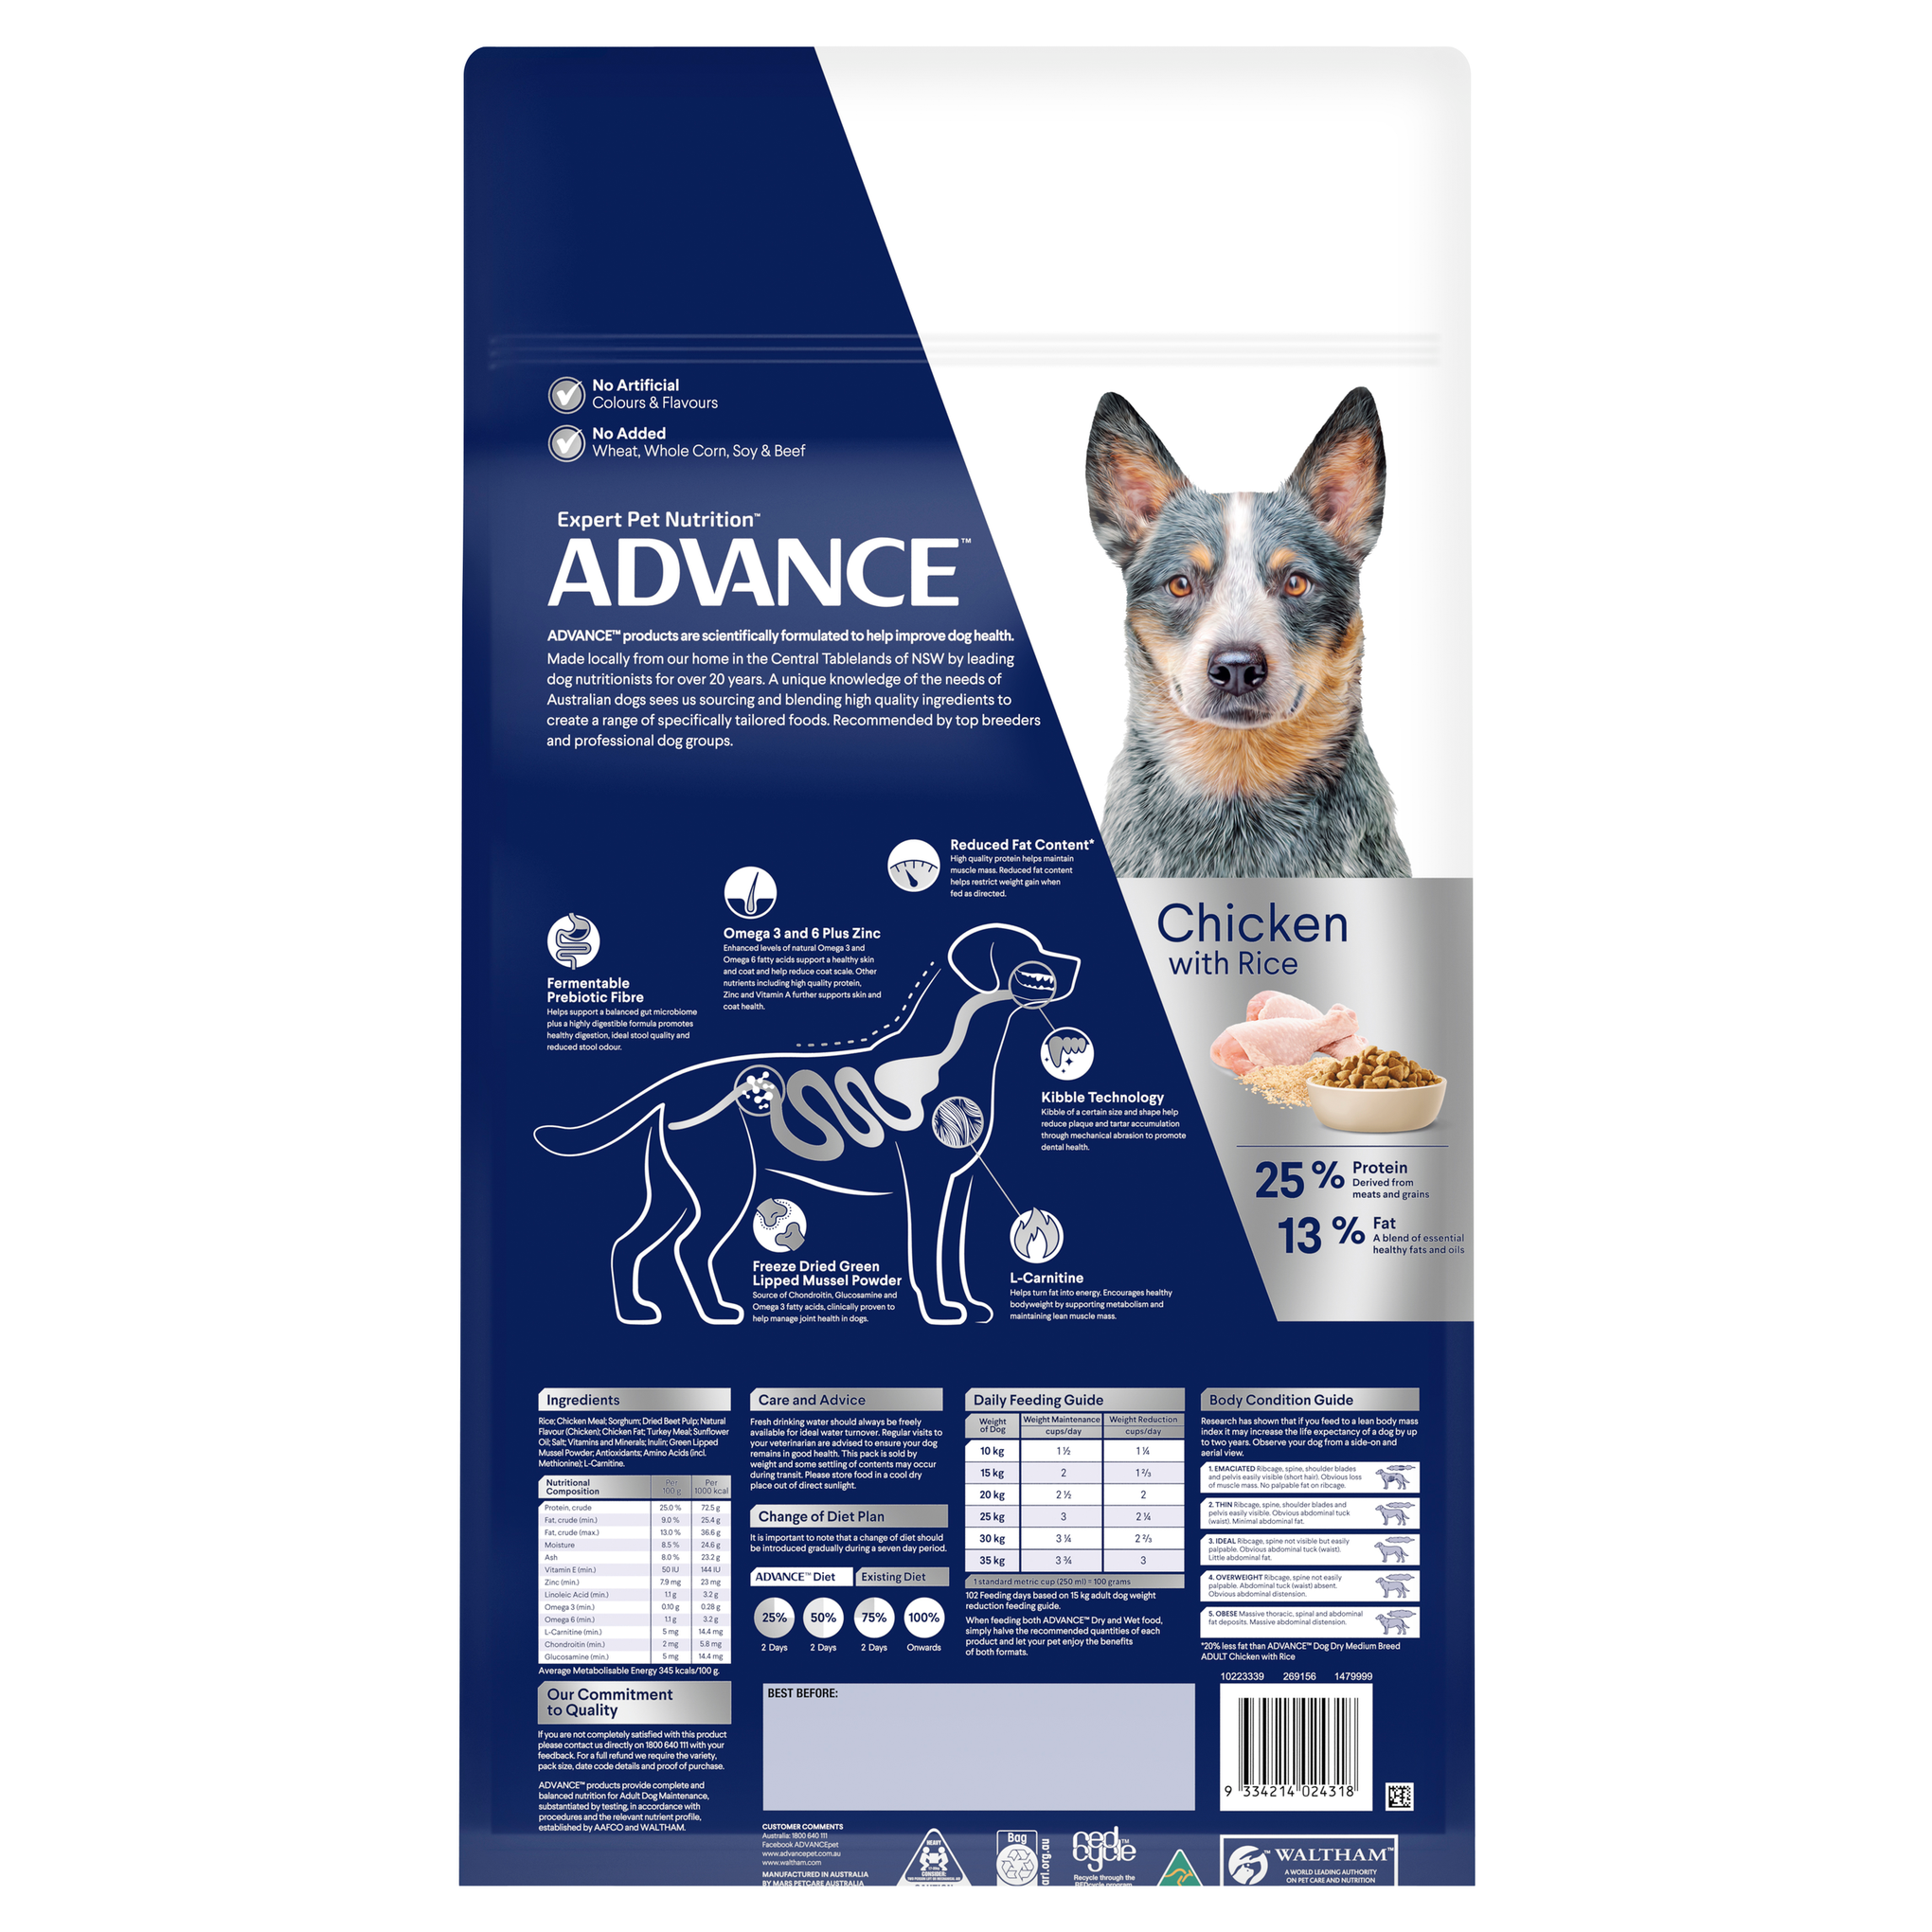 Advance Chicken and Rice Healthy Weight Medium Breed Adult Dry Dog Food 17kg